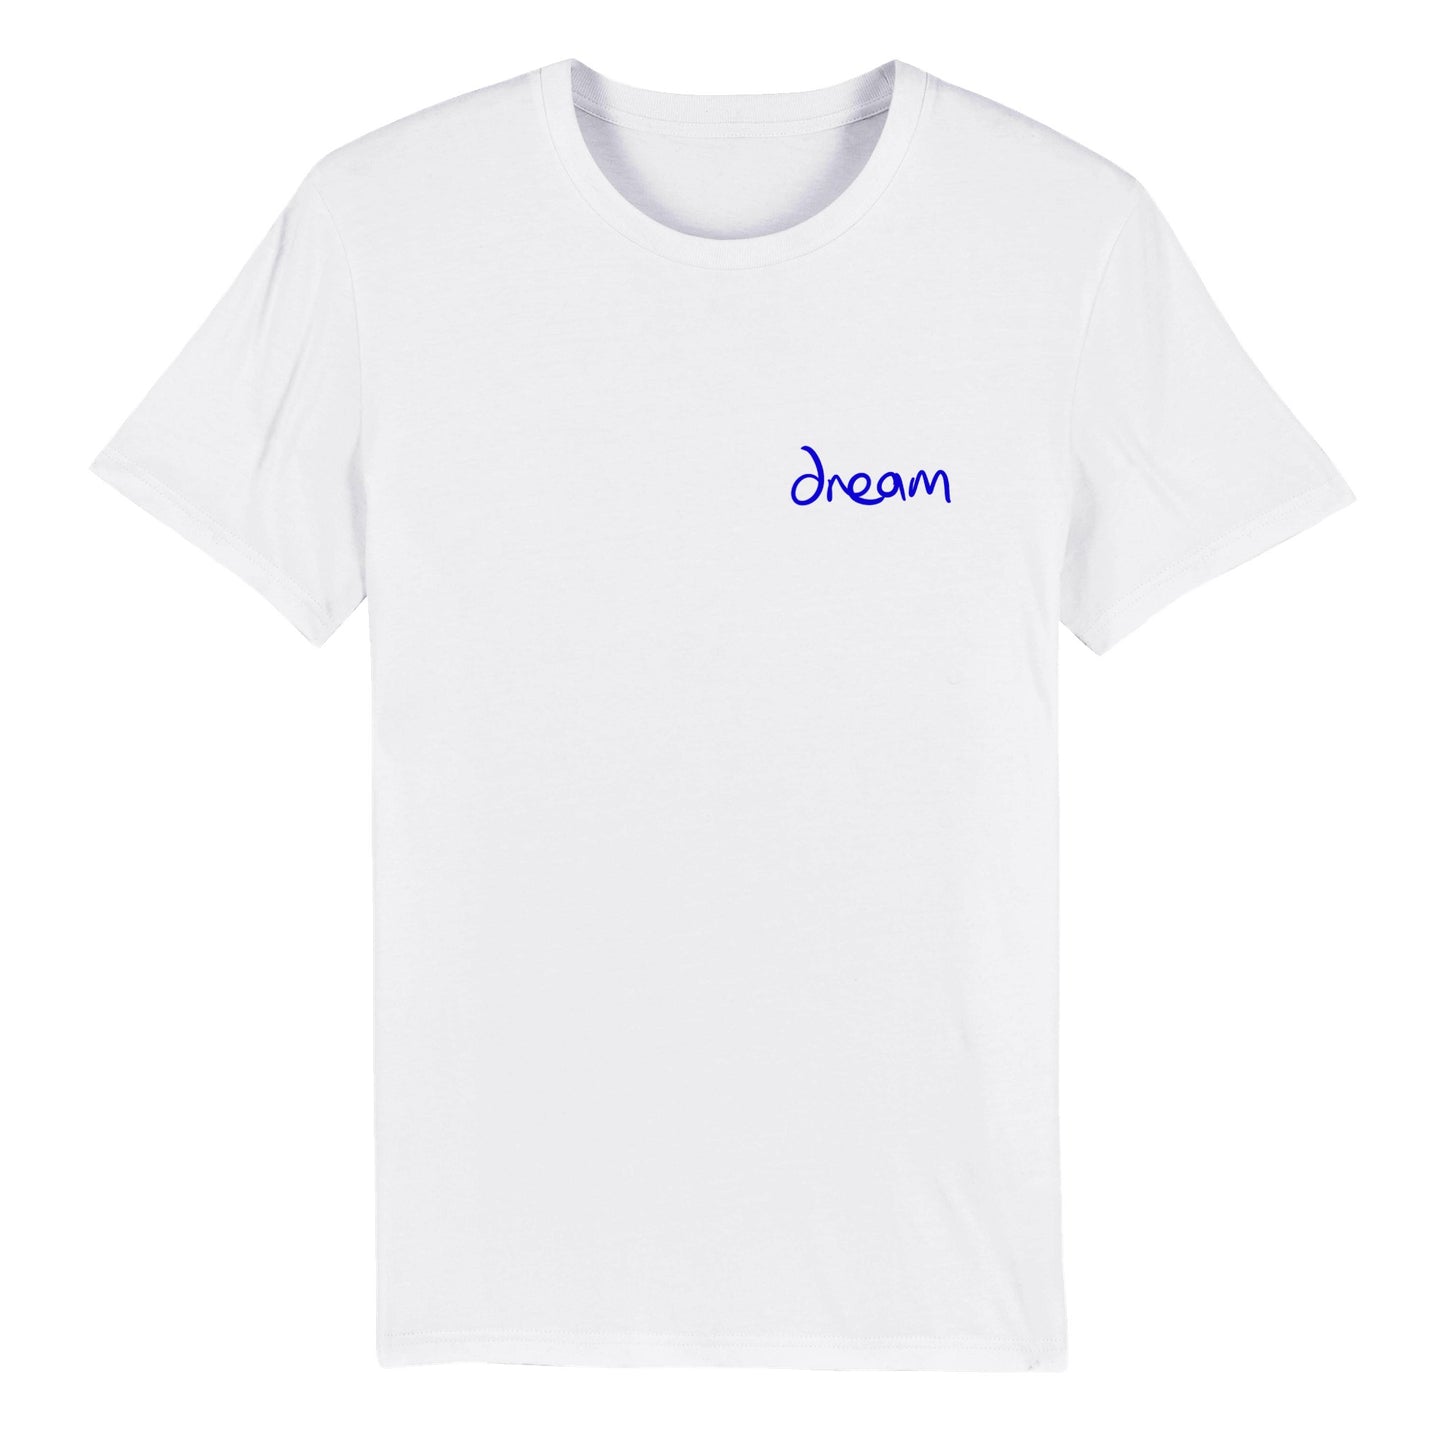 'Dream' Blue on white pocket print Organic Unisex Crewneck T-shirt. Free Shipping. Prices include tax.